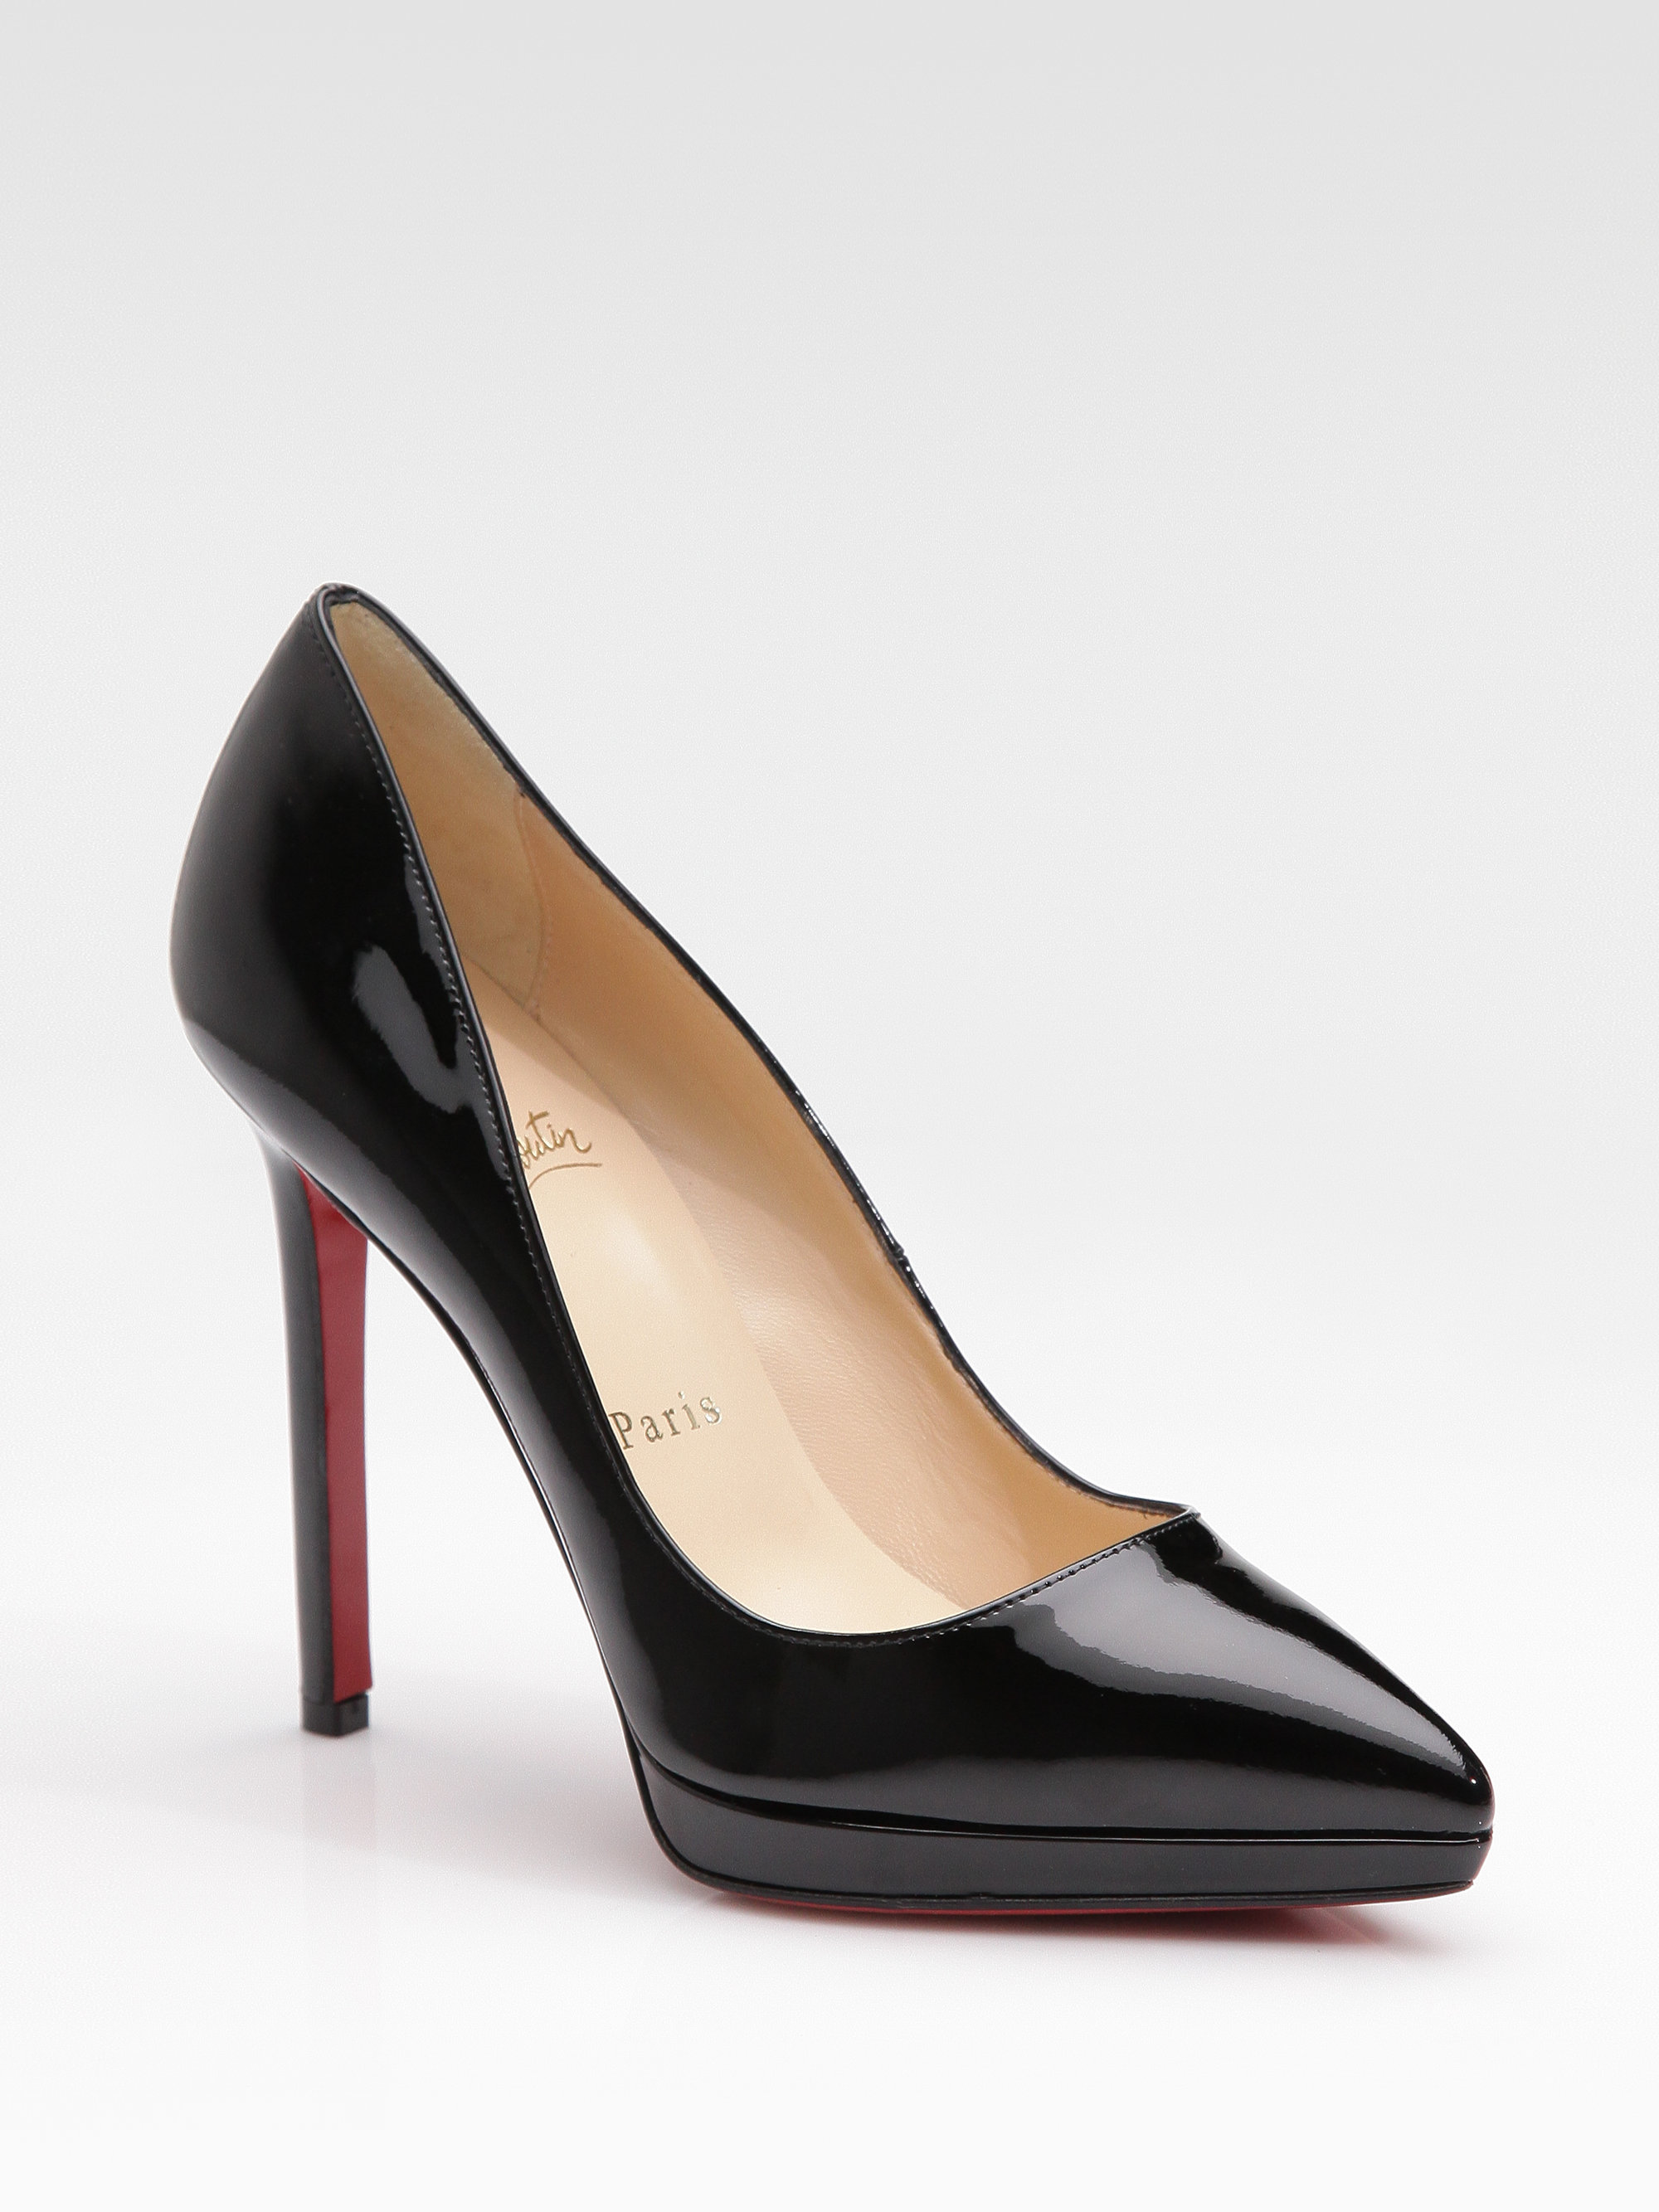 Christian Louboutin Pigalle Plato Patent Leather Platform Pumps in ...